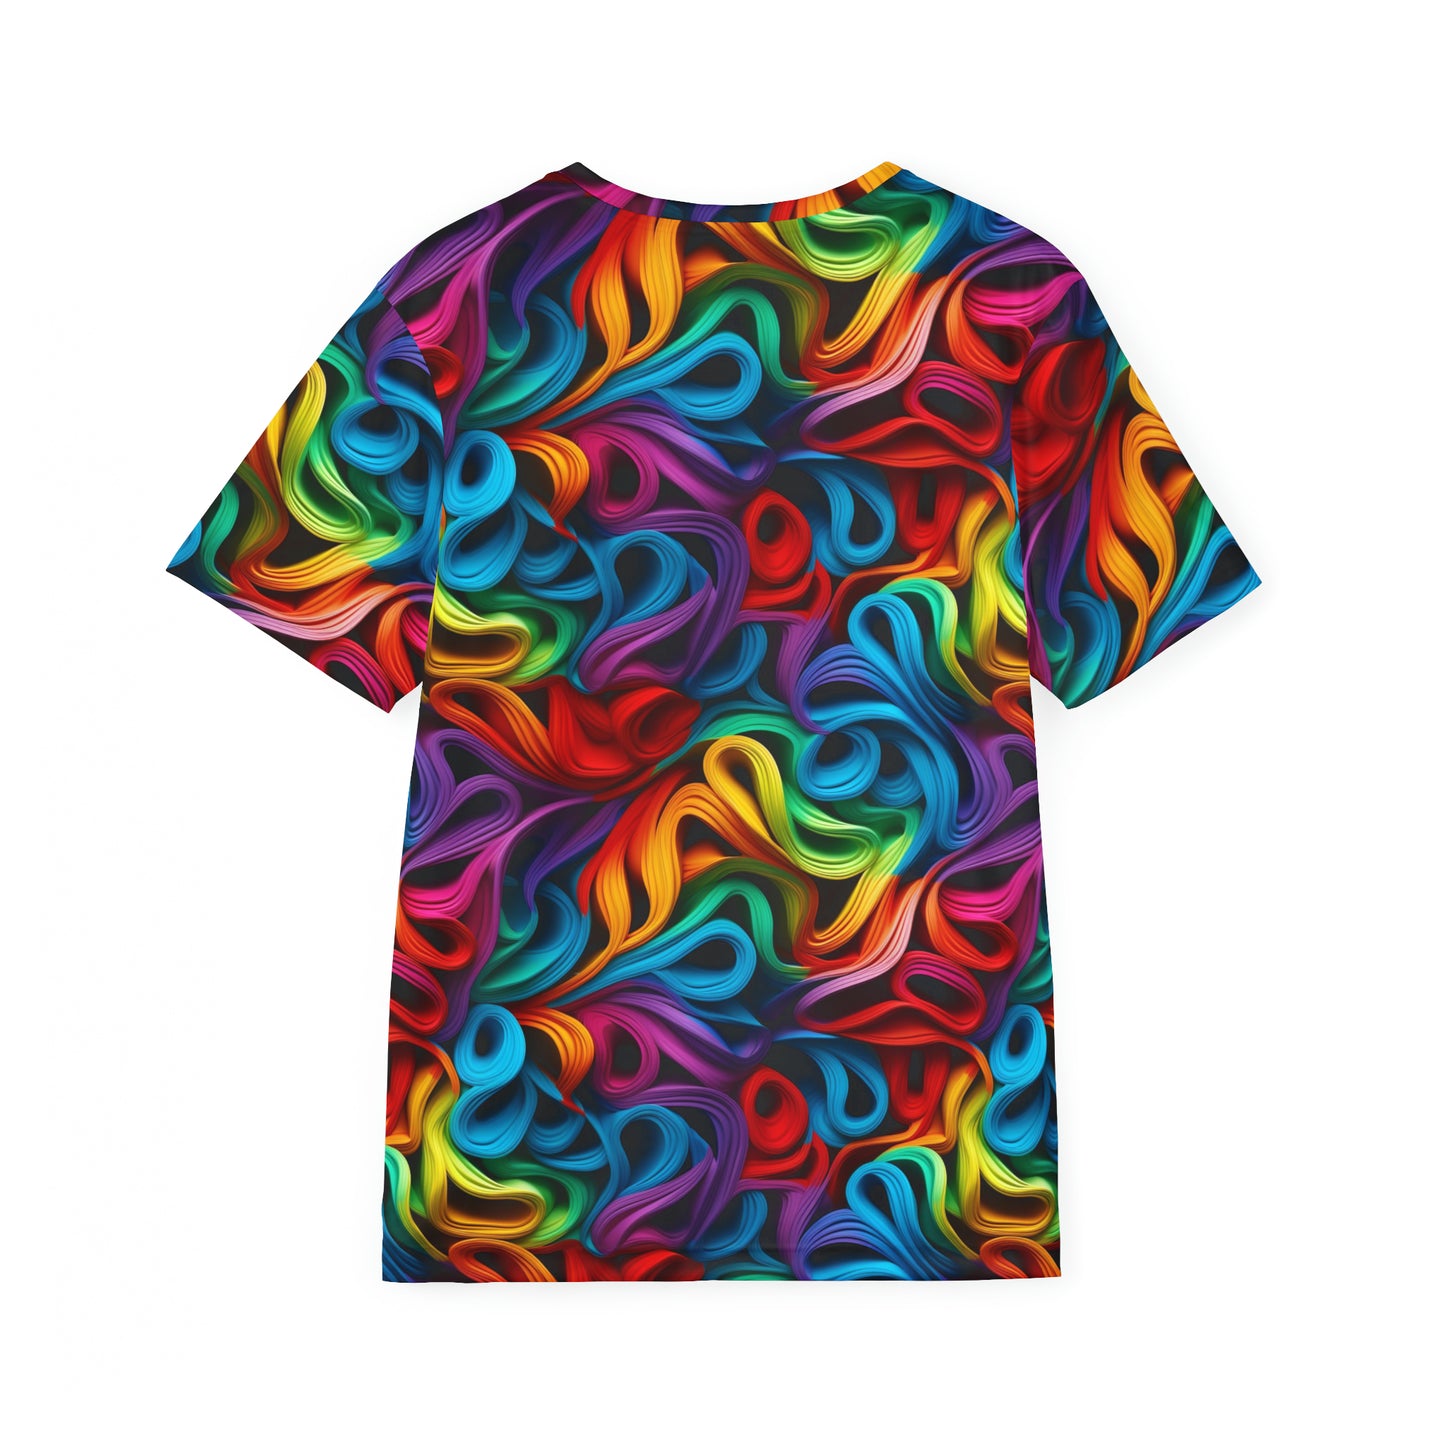 Rubber Band Rainbow Men's Sports Jersey